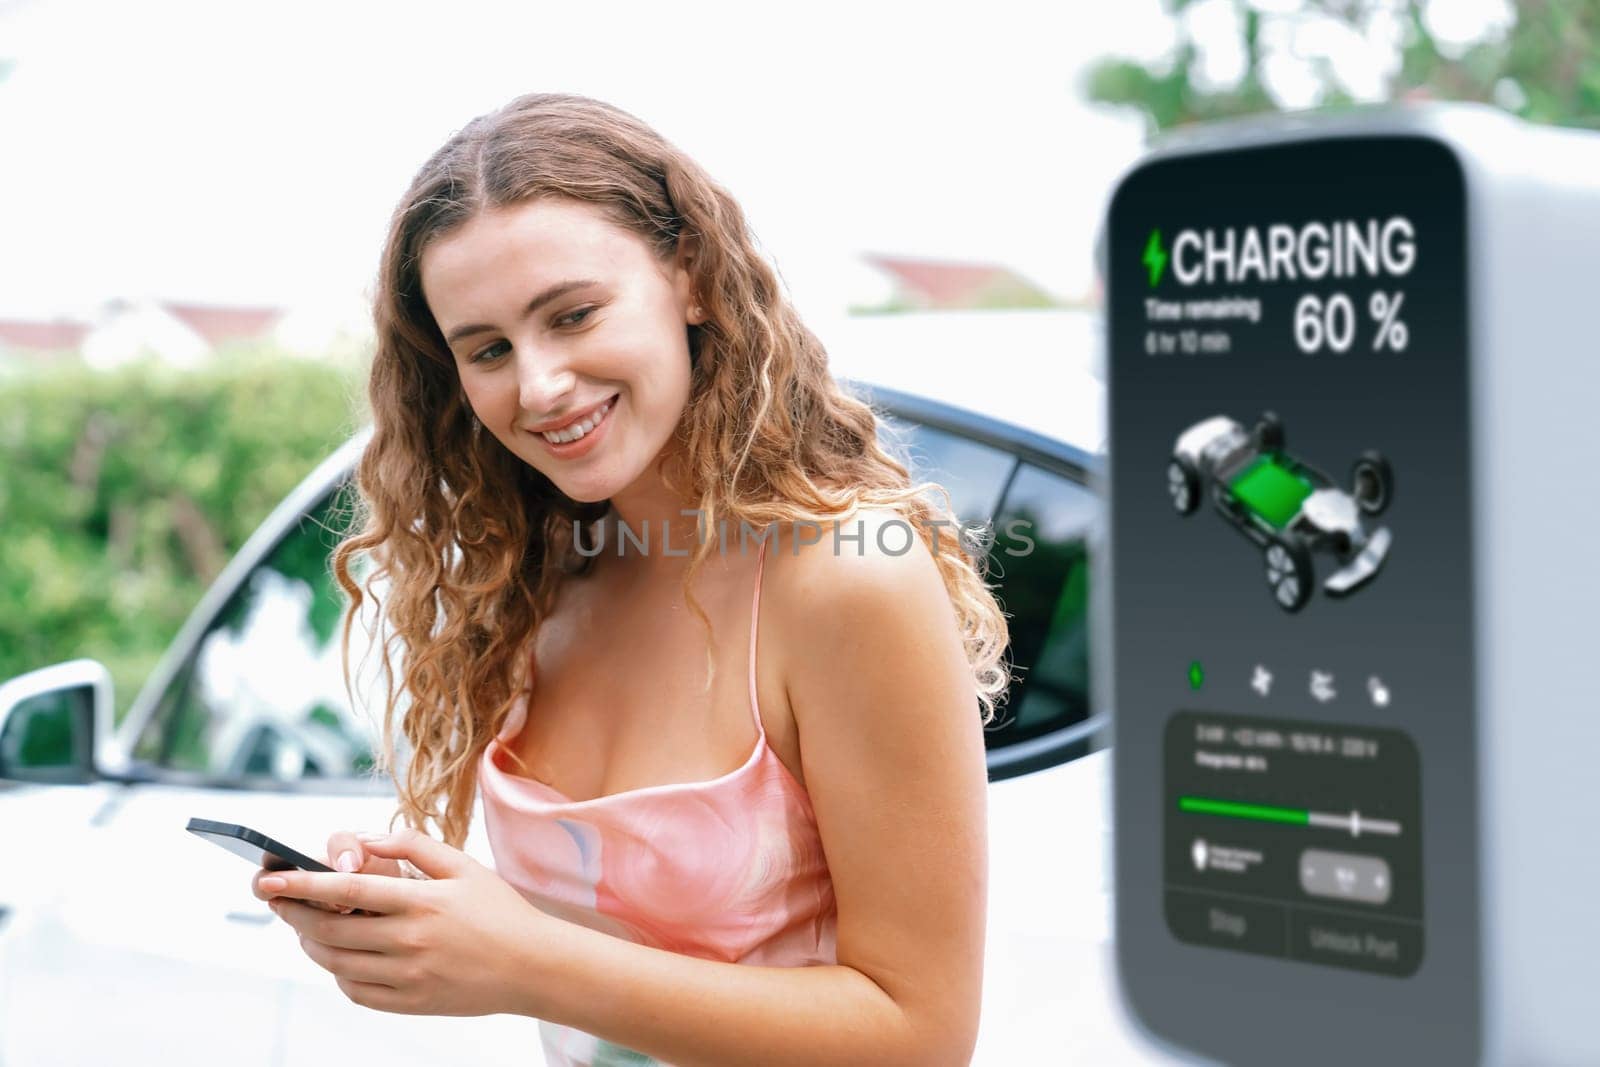 Modern eco-friendly woman recharging electric vehicle from EV charging station. Innovative EV technology utilization for tracking energy usage to optimize battery charging. Synchronos